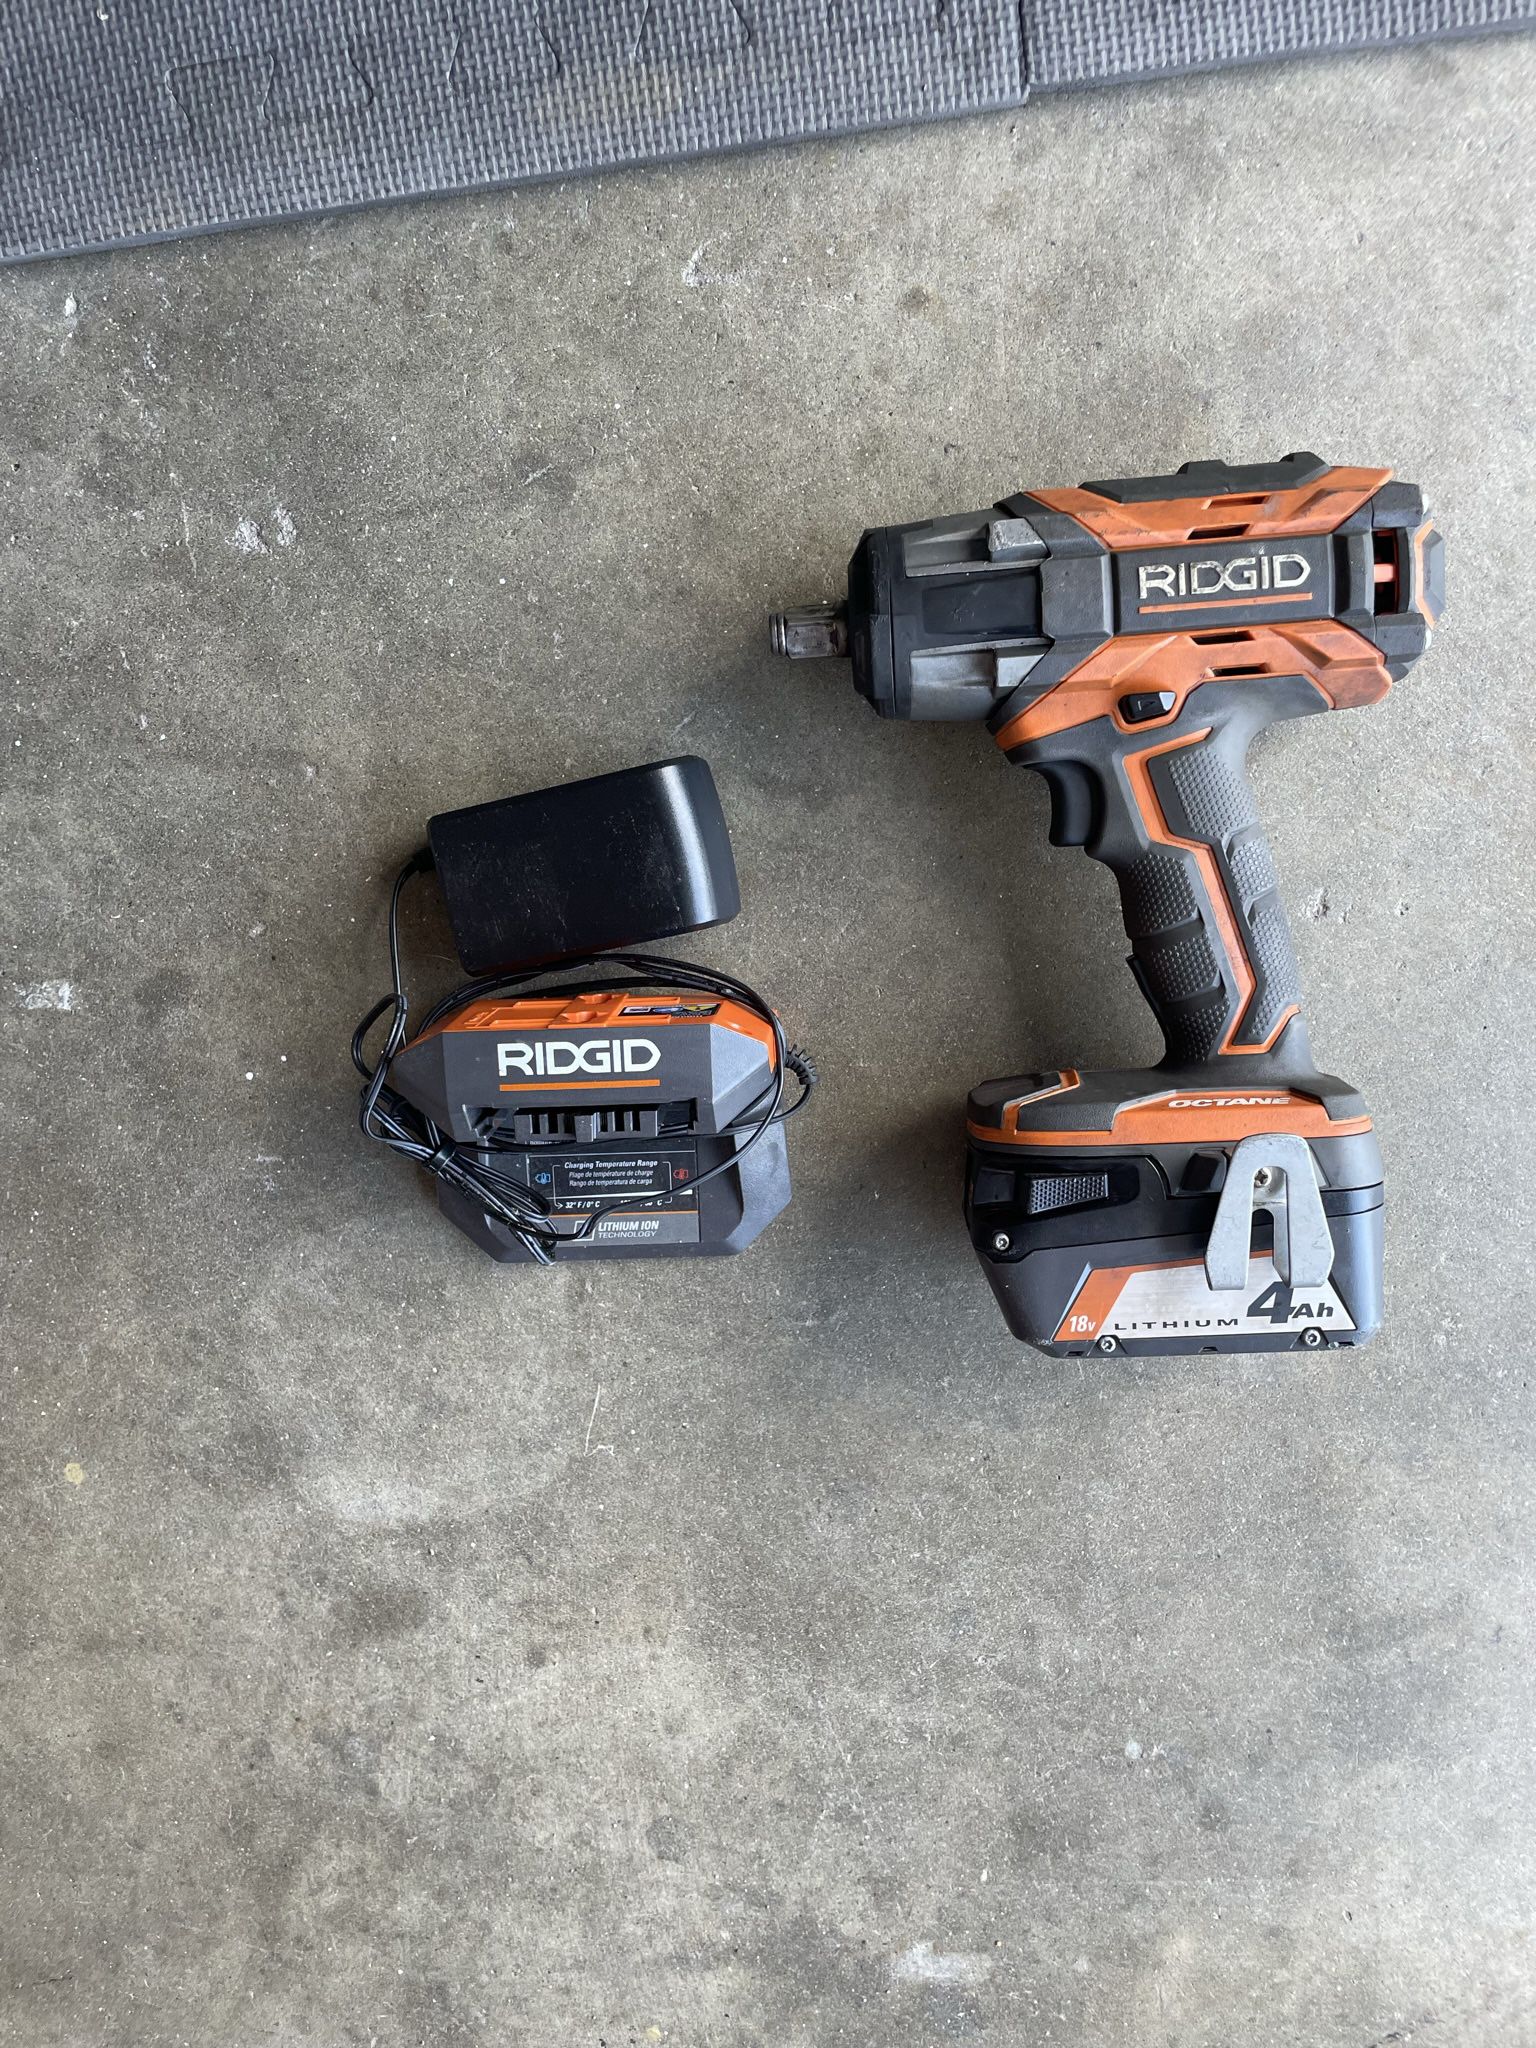 Rigid 1/2 Mid Torque Impact Wrench Charger And Battery Included 